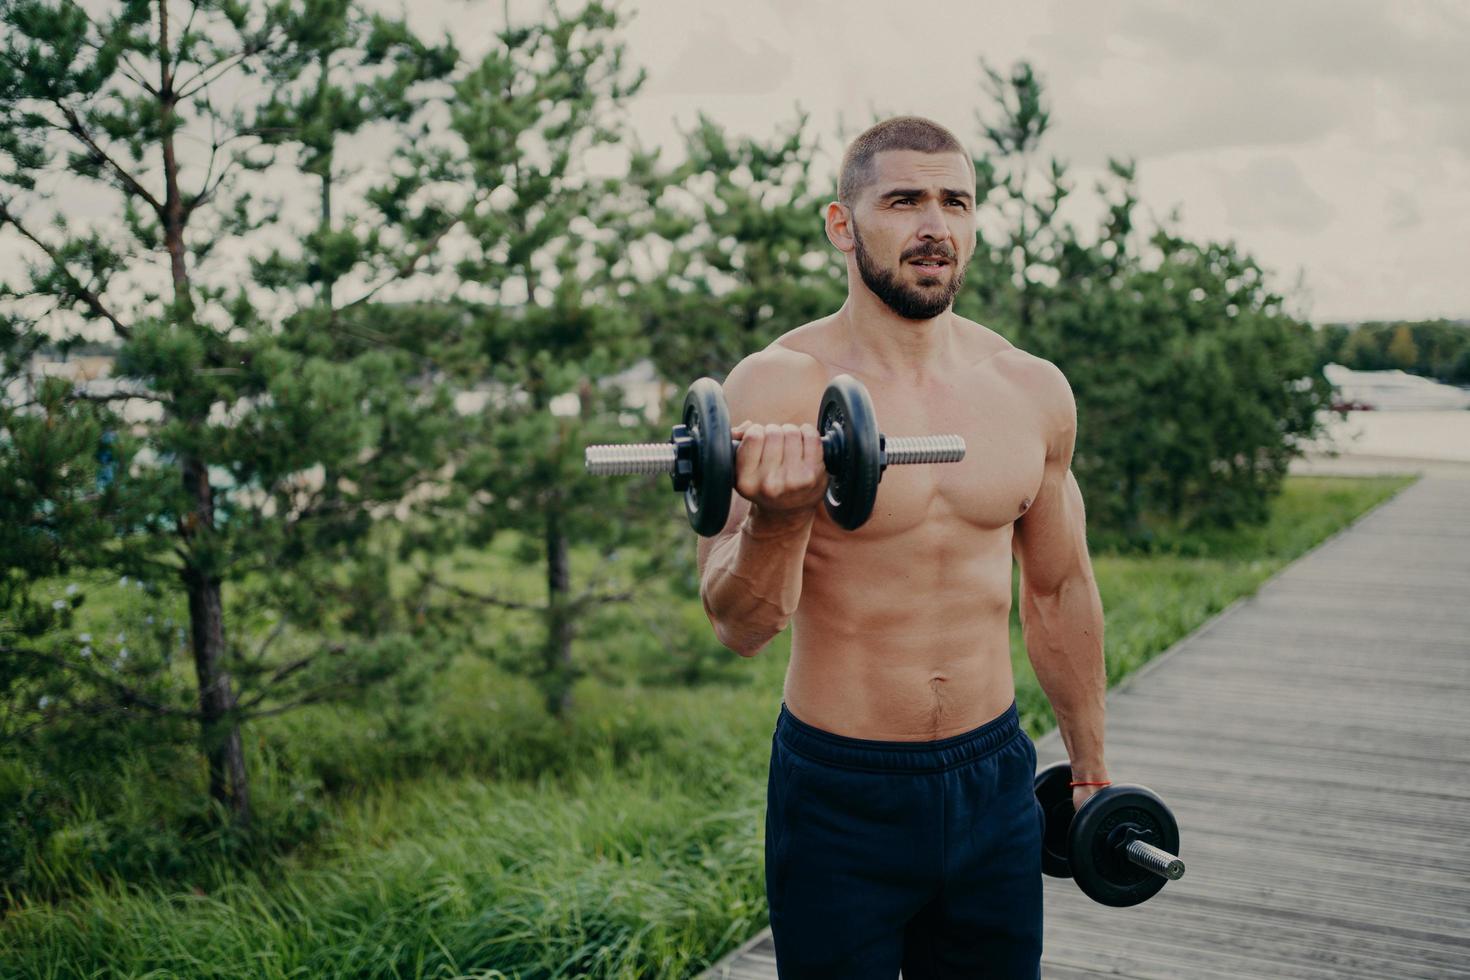 Body care and power lifting concept. Strong muscular athlete bearded man raises dumbbells, lifts heavy barbells, performs shoulder press, poses outside against nature background. Sport exercising photo